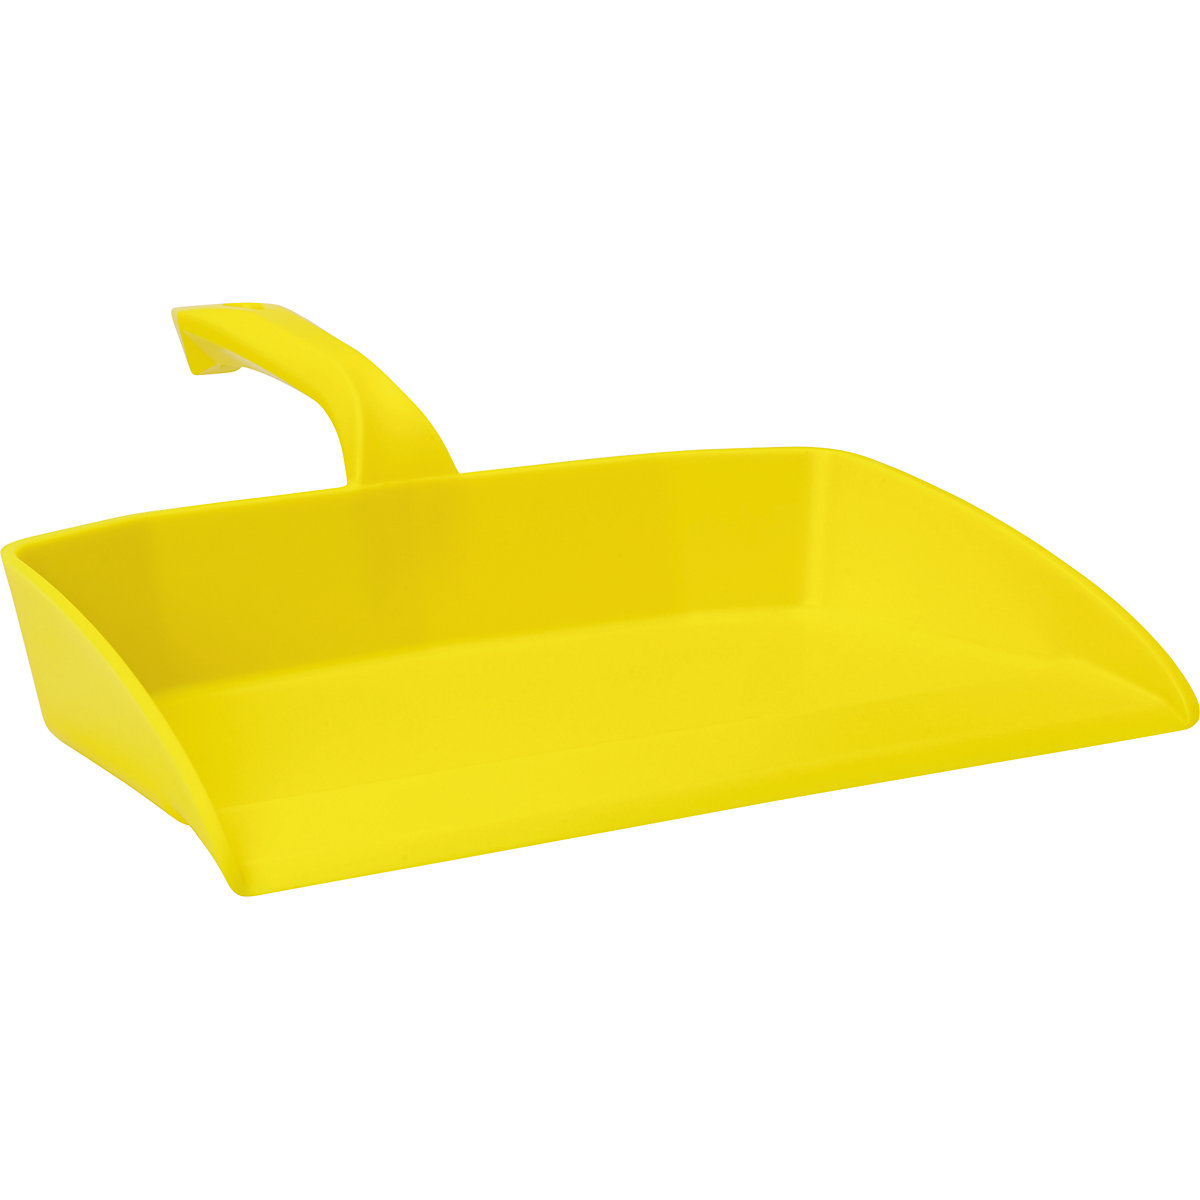 Vikan – Dustpan, overall length 330 mm, pack of 10, yellow